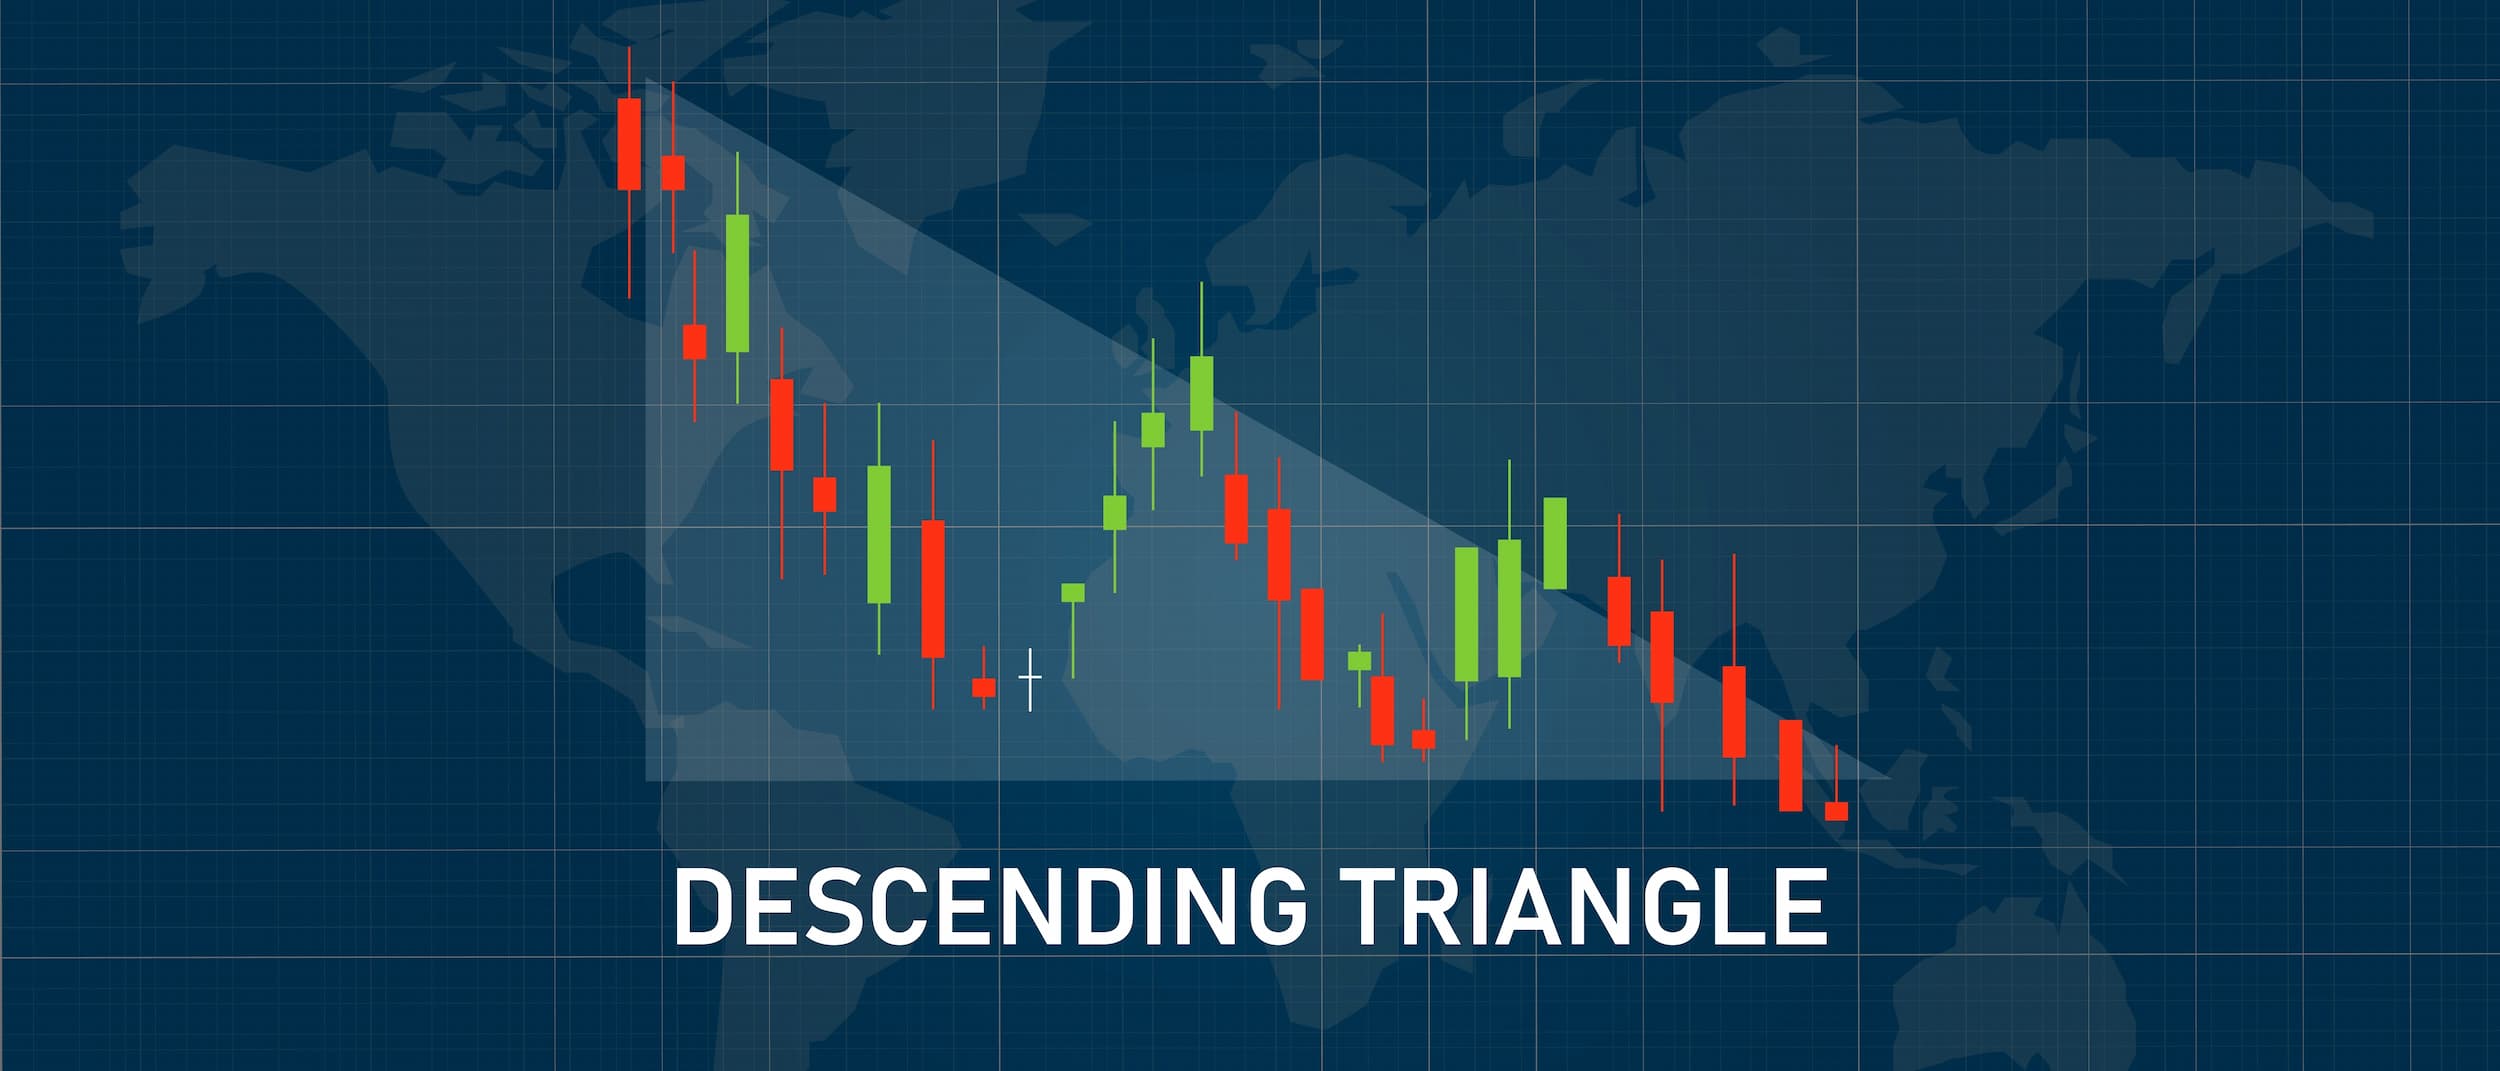 Descending triangle down trend candle stick pattern in stock market